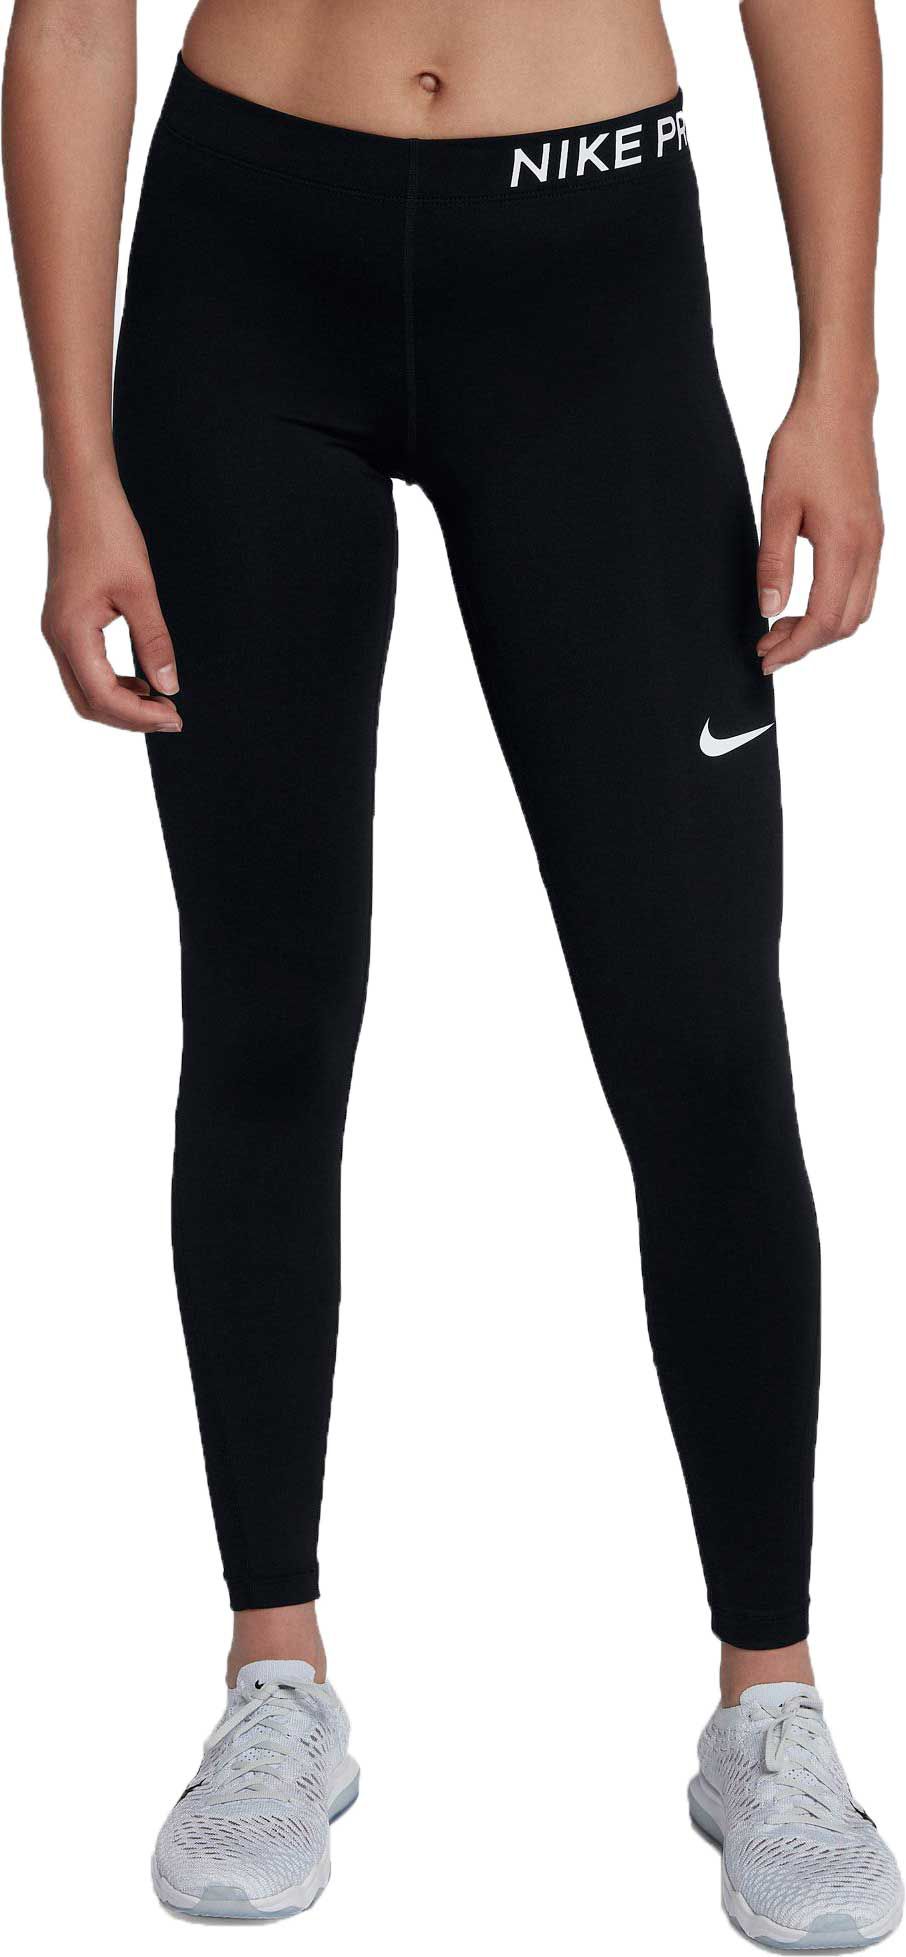 Nike Women's Pro Cool Tights | DICK'S Sporting Goods